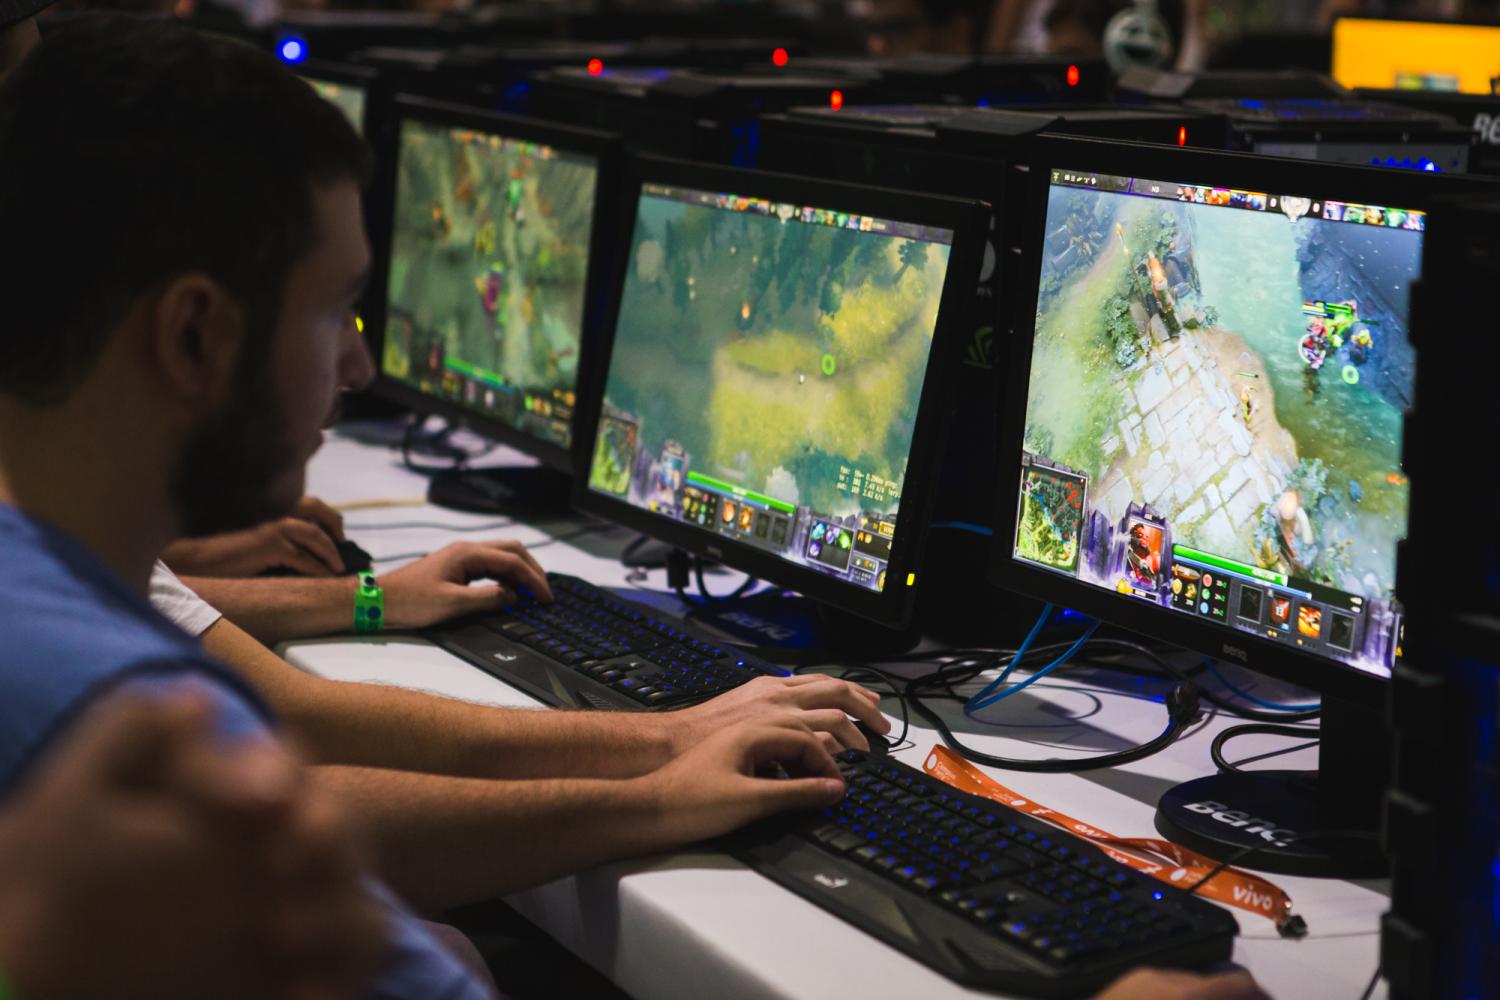 The Esports Club plays a variety of competitive games, including League of Legends, pictured above.